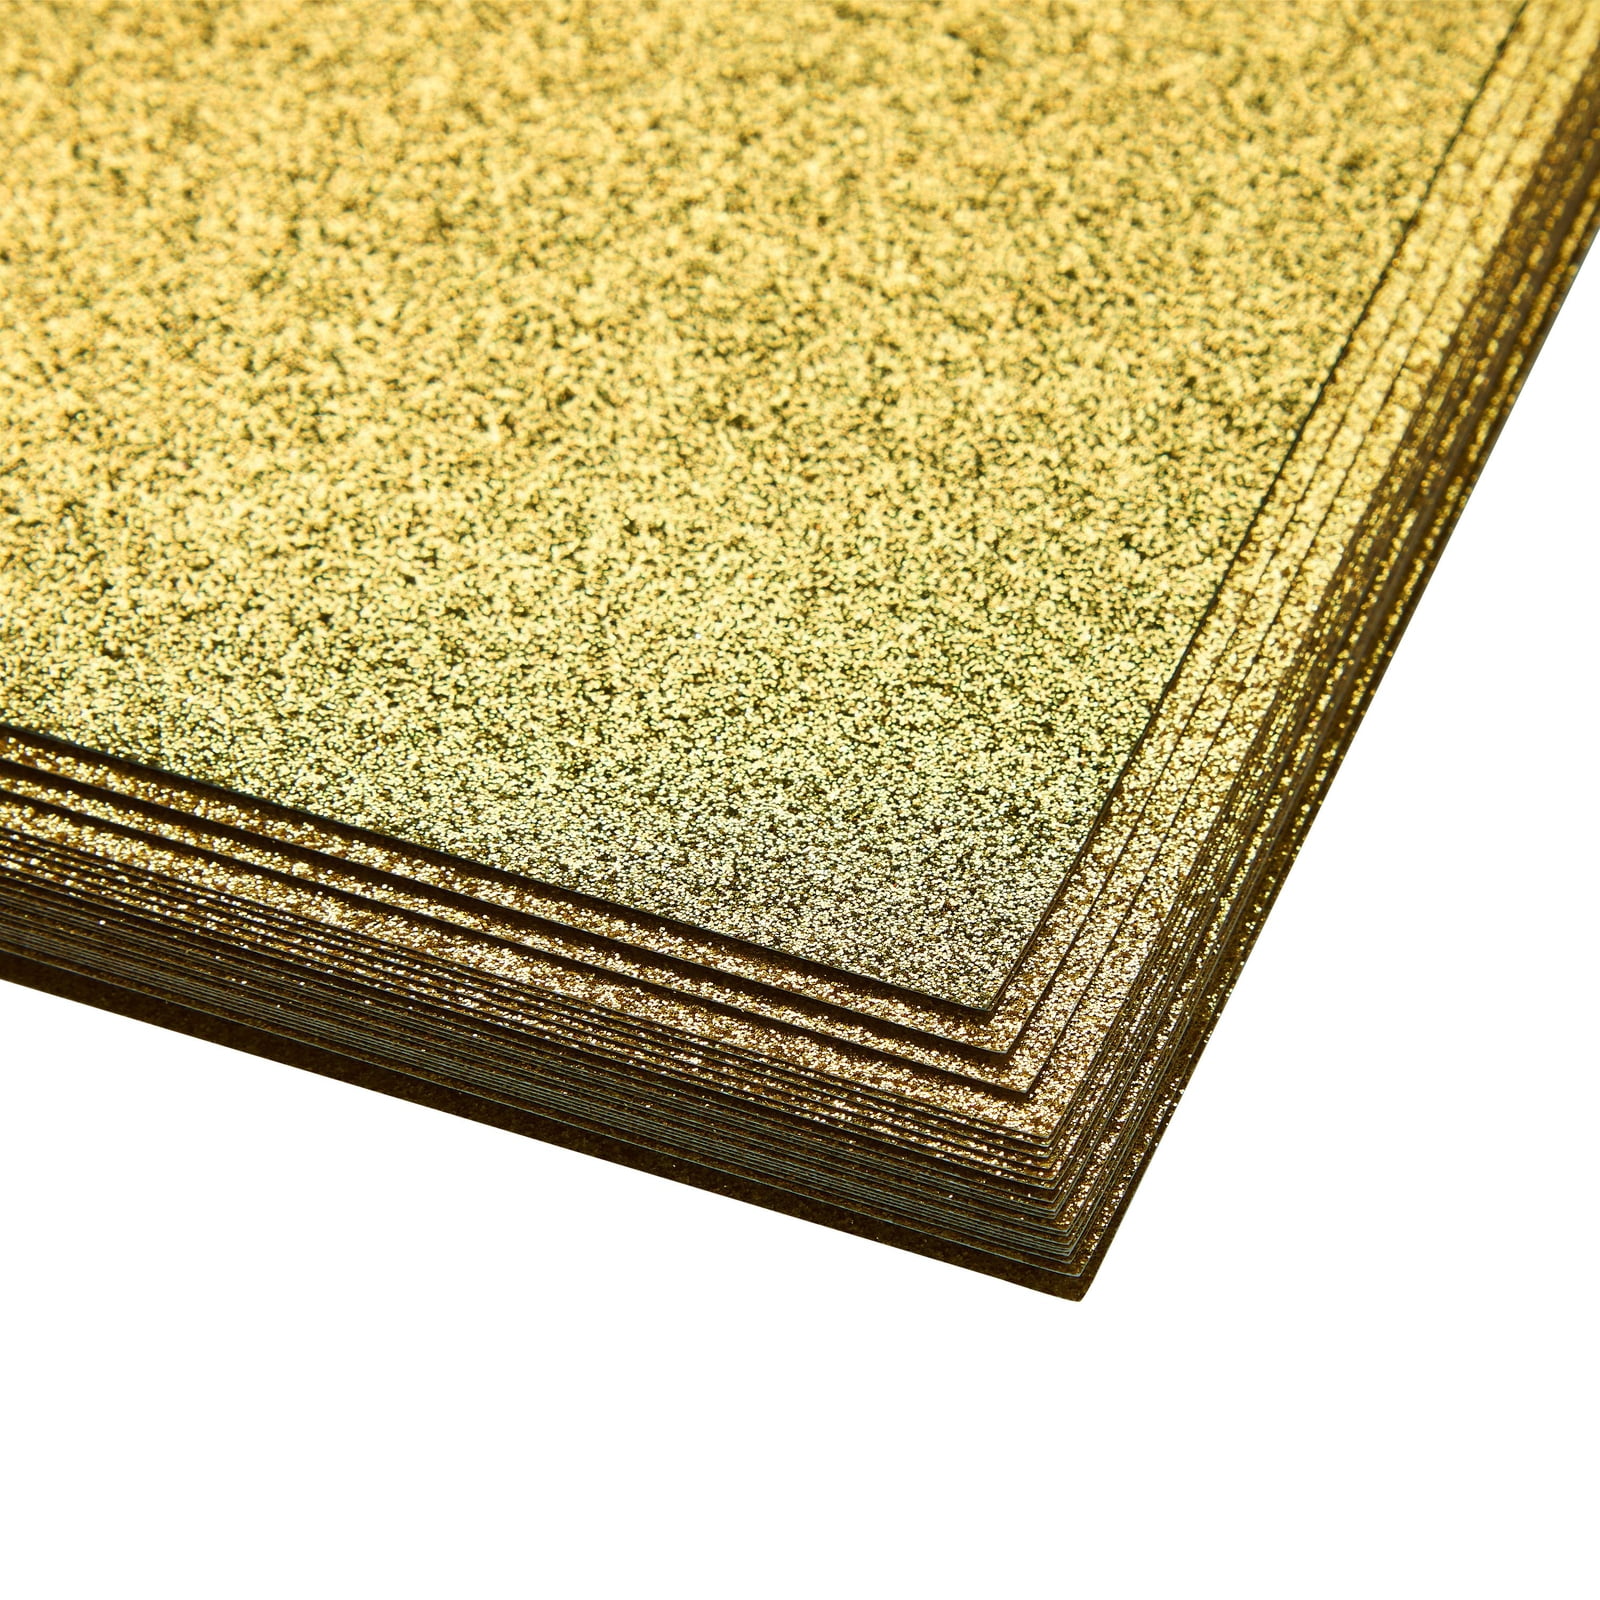 24 Sheets Glitter Gold Paper for Crafts, Wedding Invitations, Card Making,  Scrapbook, Single Sided (8.5 x 11 In) 